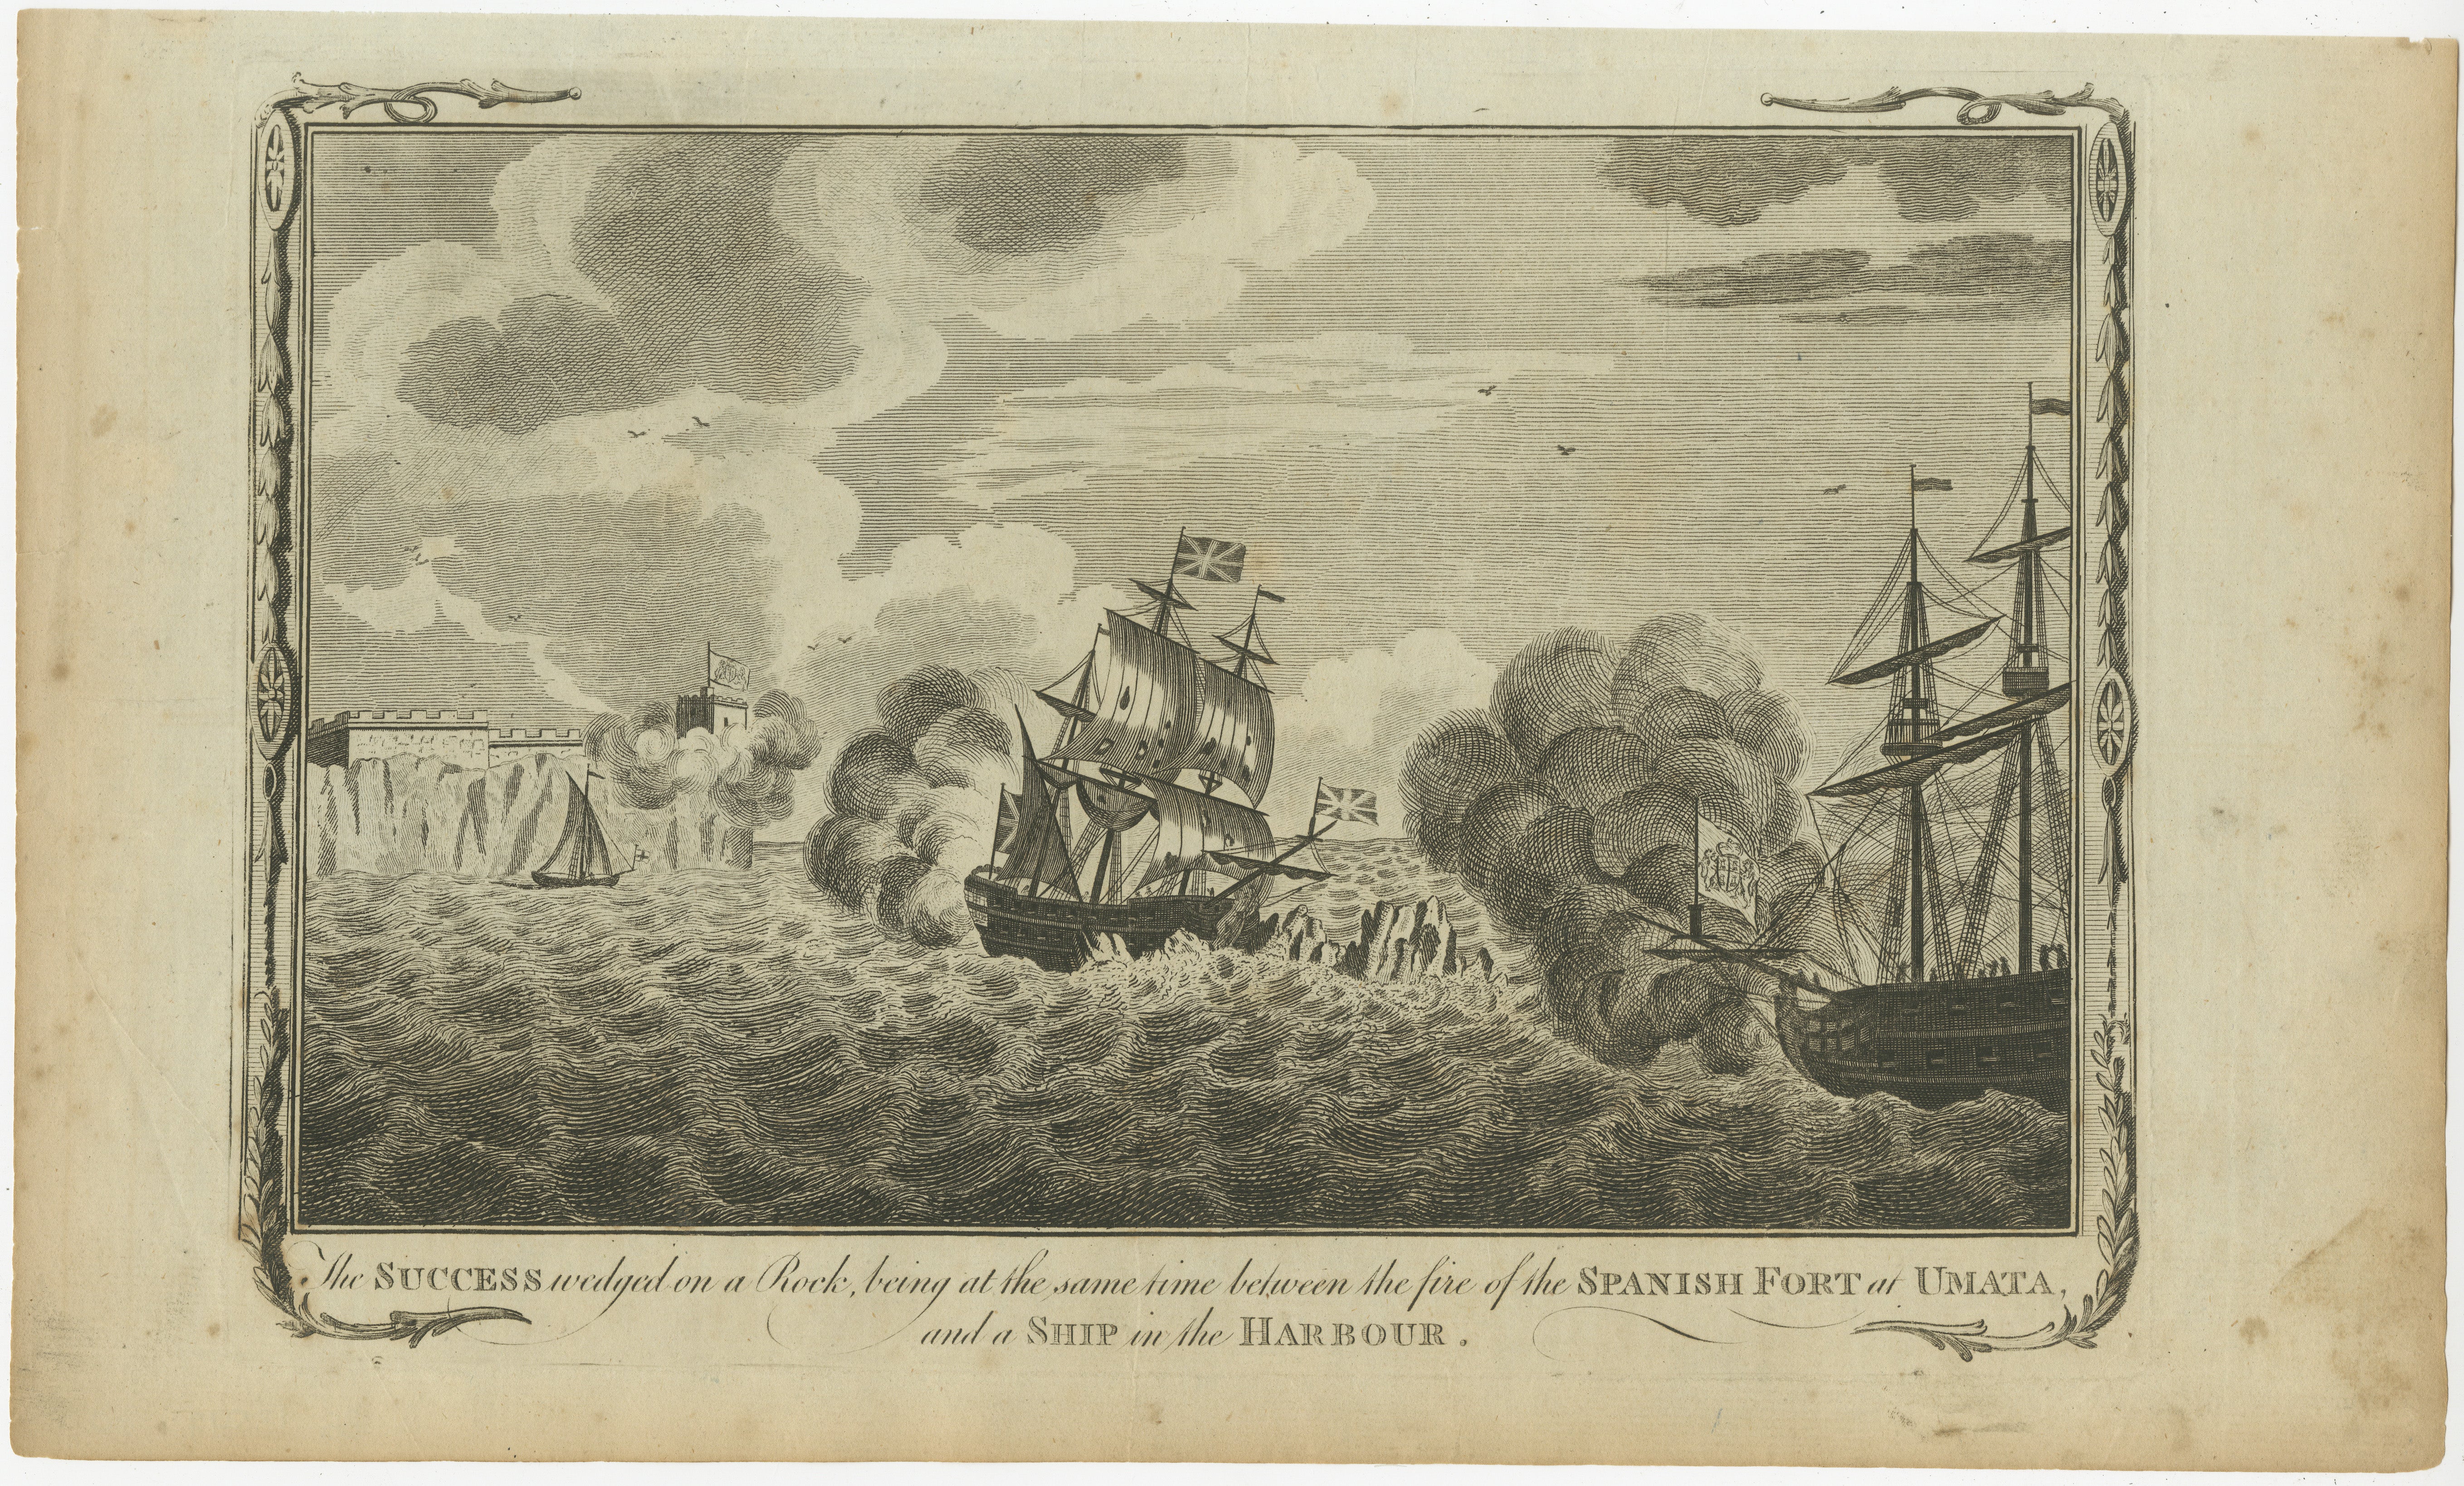 This is an 18th-century engraving depicting a nautical scene with dramatic action. The image shows two sailing ships in a state of distress near a rocky coastline, with the central ship striking a rock and billowing smoke—presumably from cannon